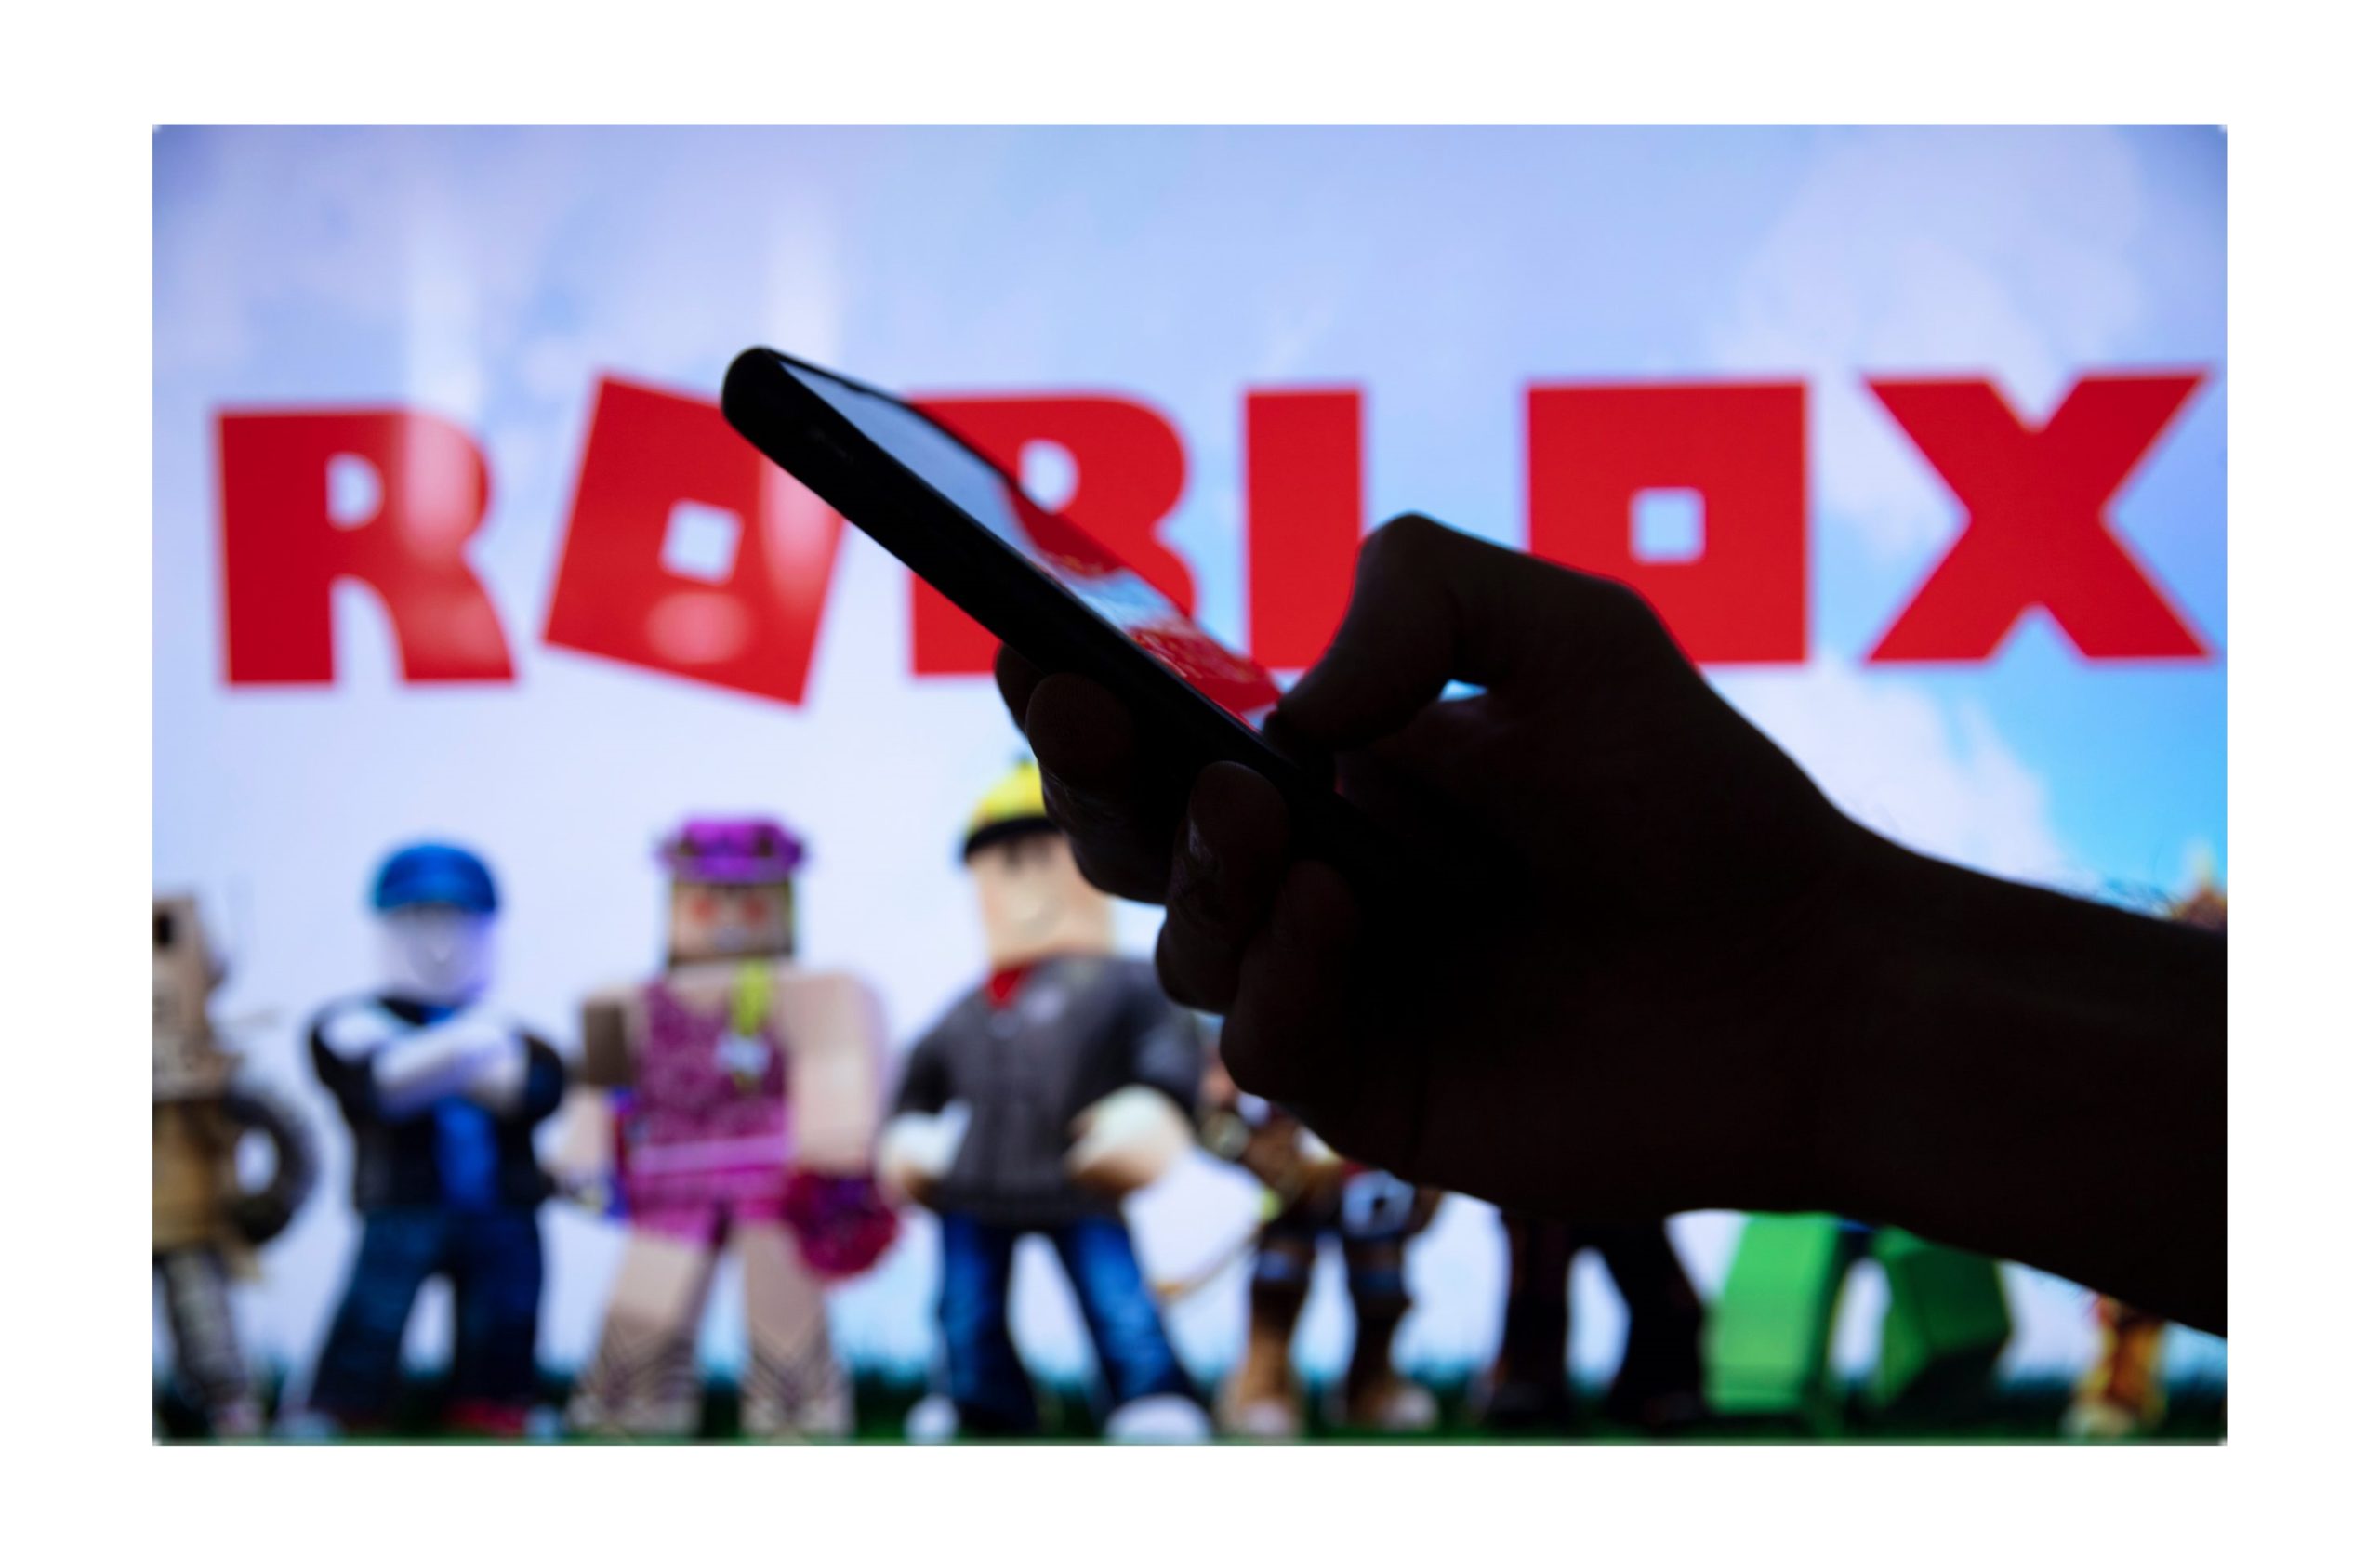 Roblox 'illegally facilitated child gambling': lawsuit